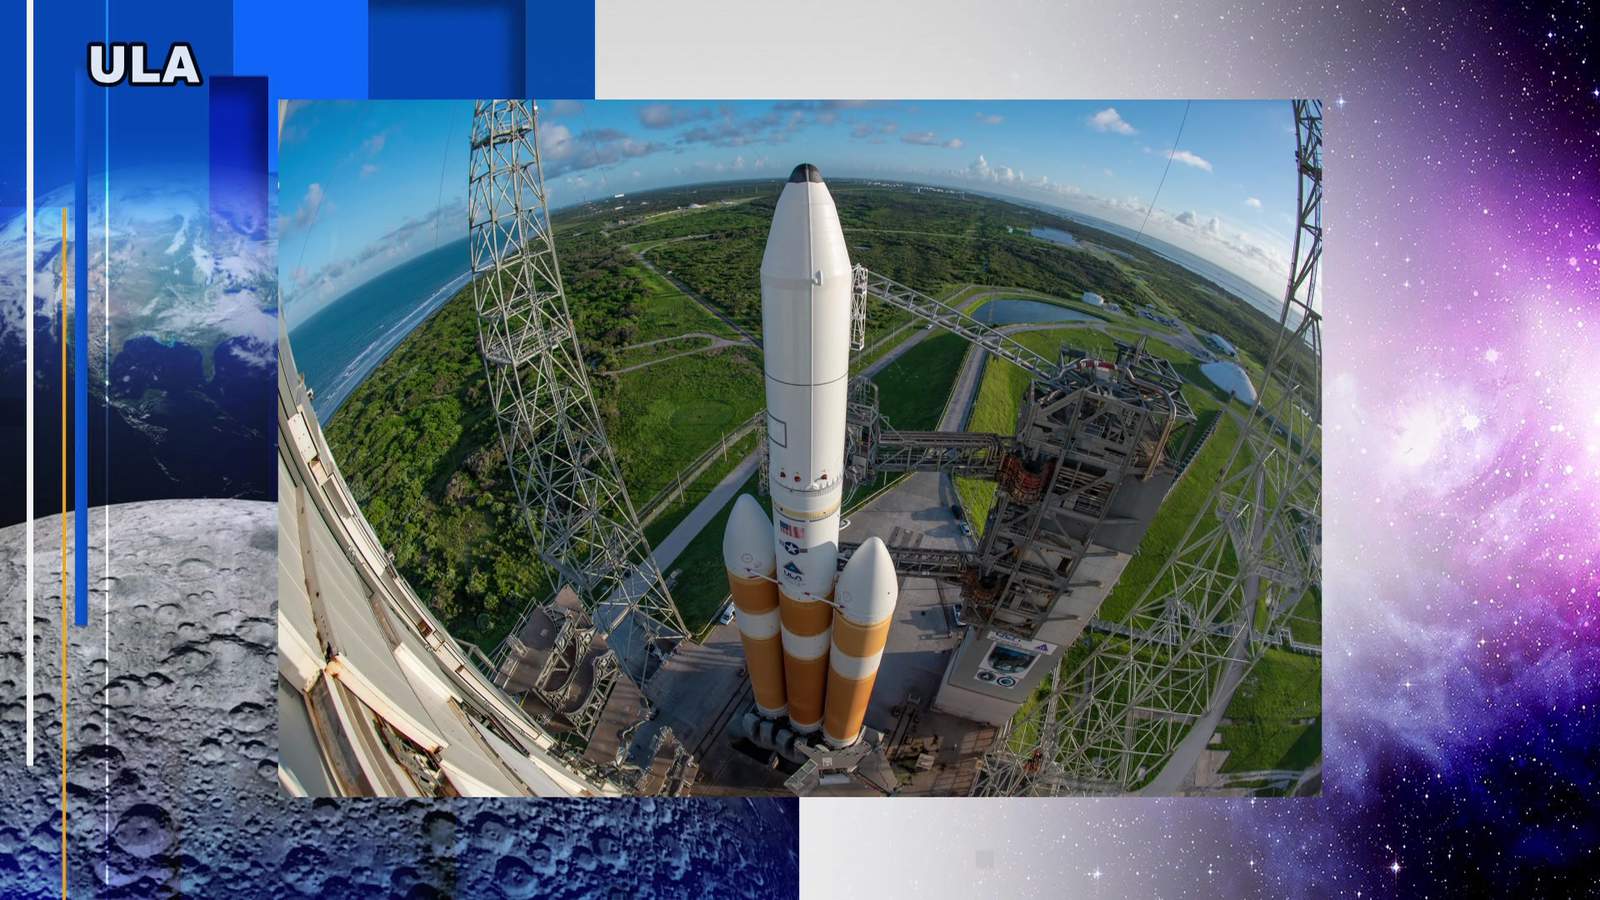 Rocket launch scheduled for minutes before midnight in Florida. Watch the launch here